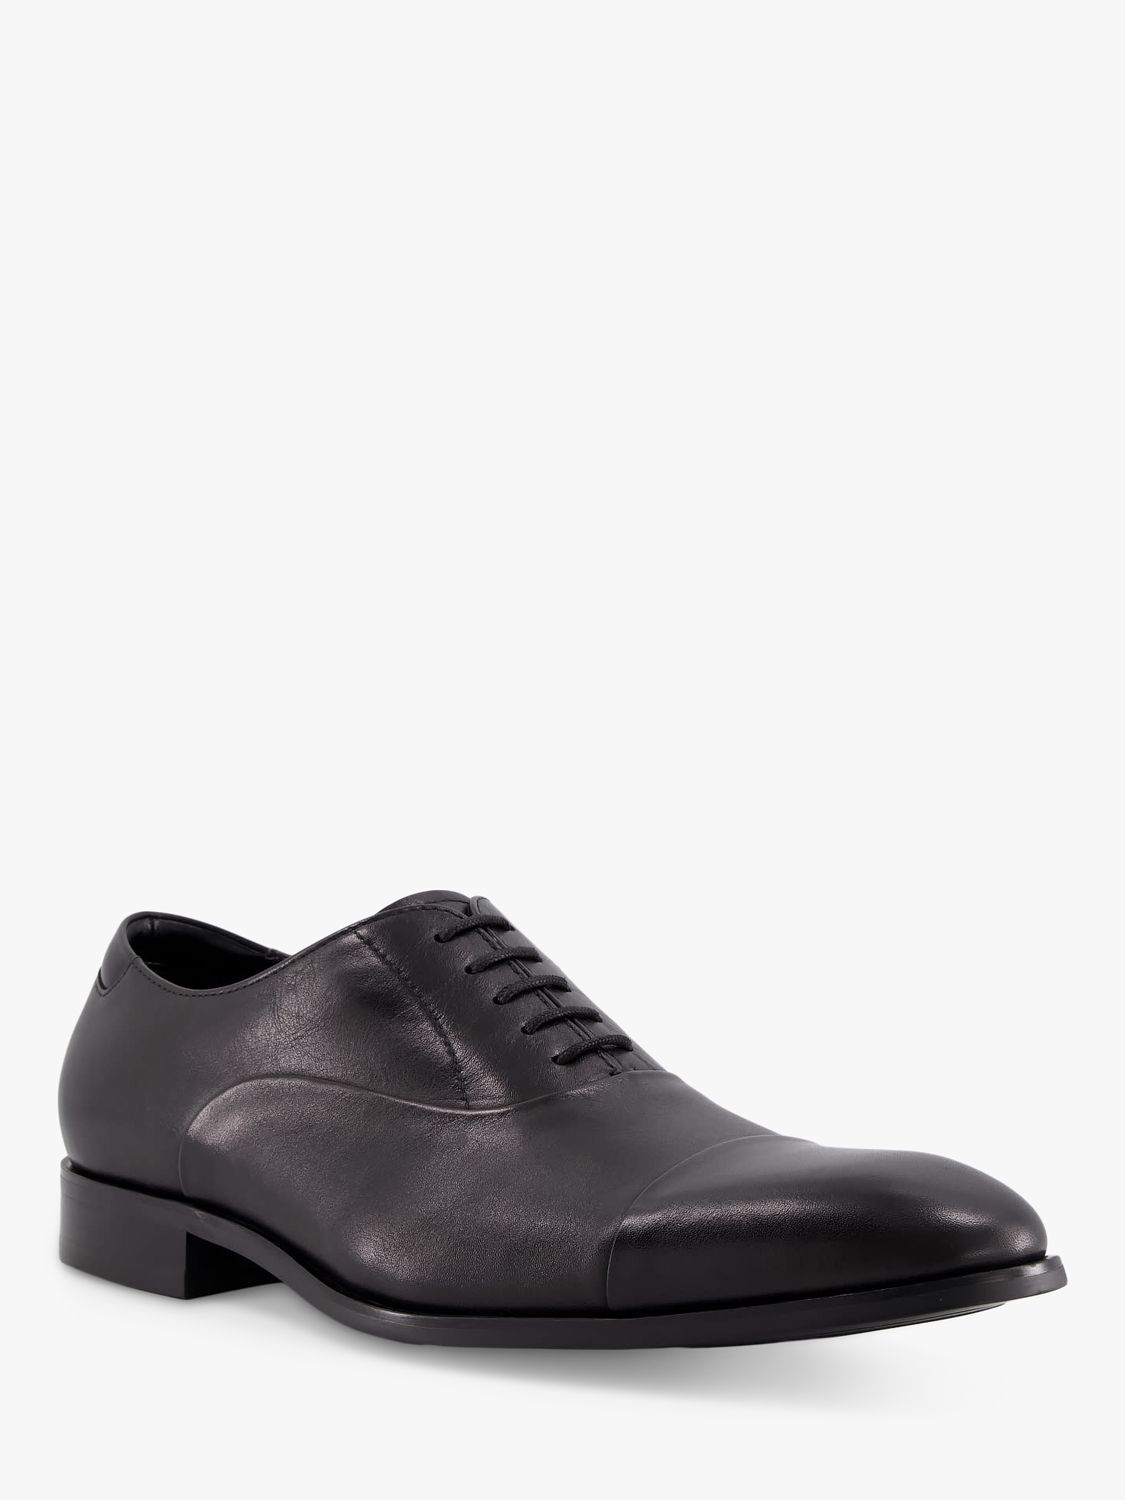 Dune Secrecy Leather Derby Shoes, Black at John Lewis & Partners